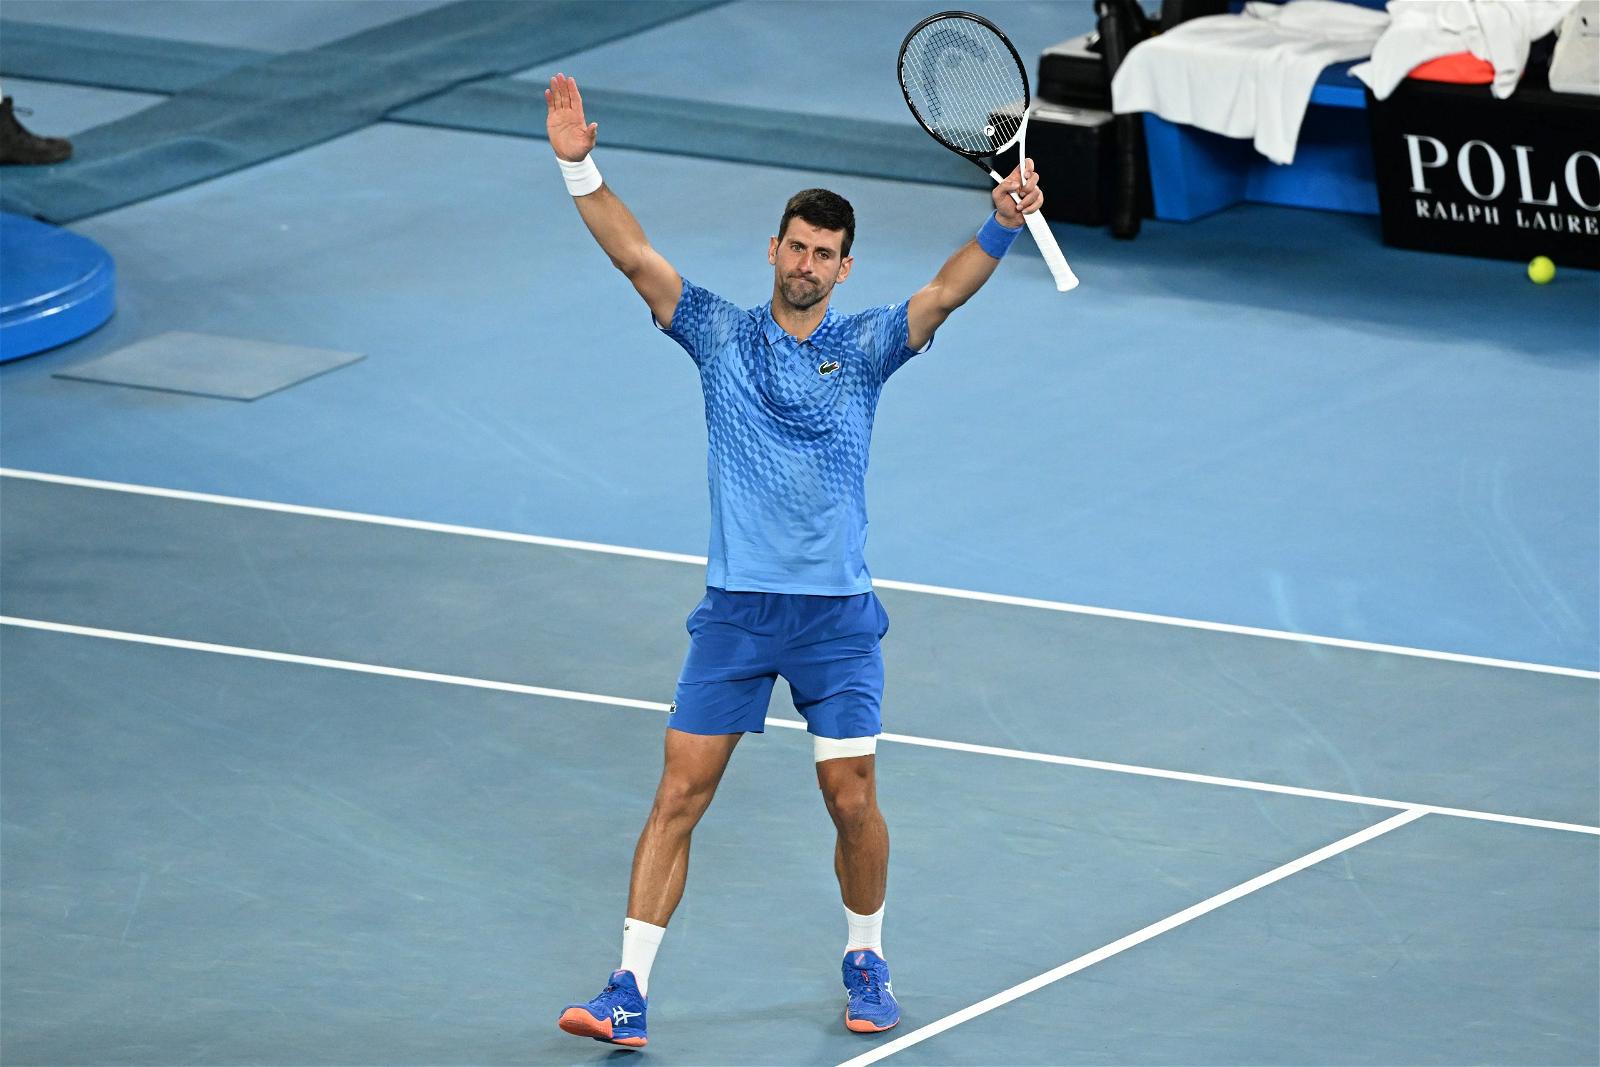 Djokovic secures year-end No. 1 ranking for by beating Rune at ATP Finals